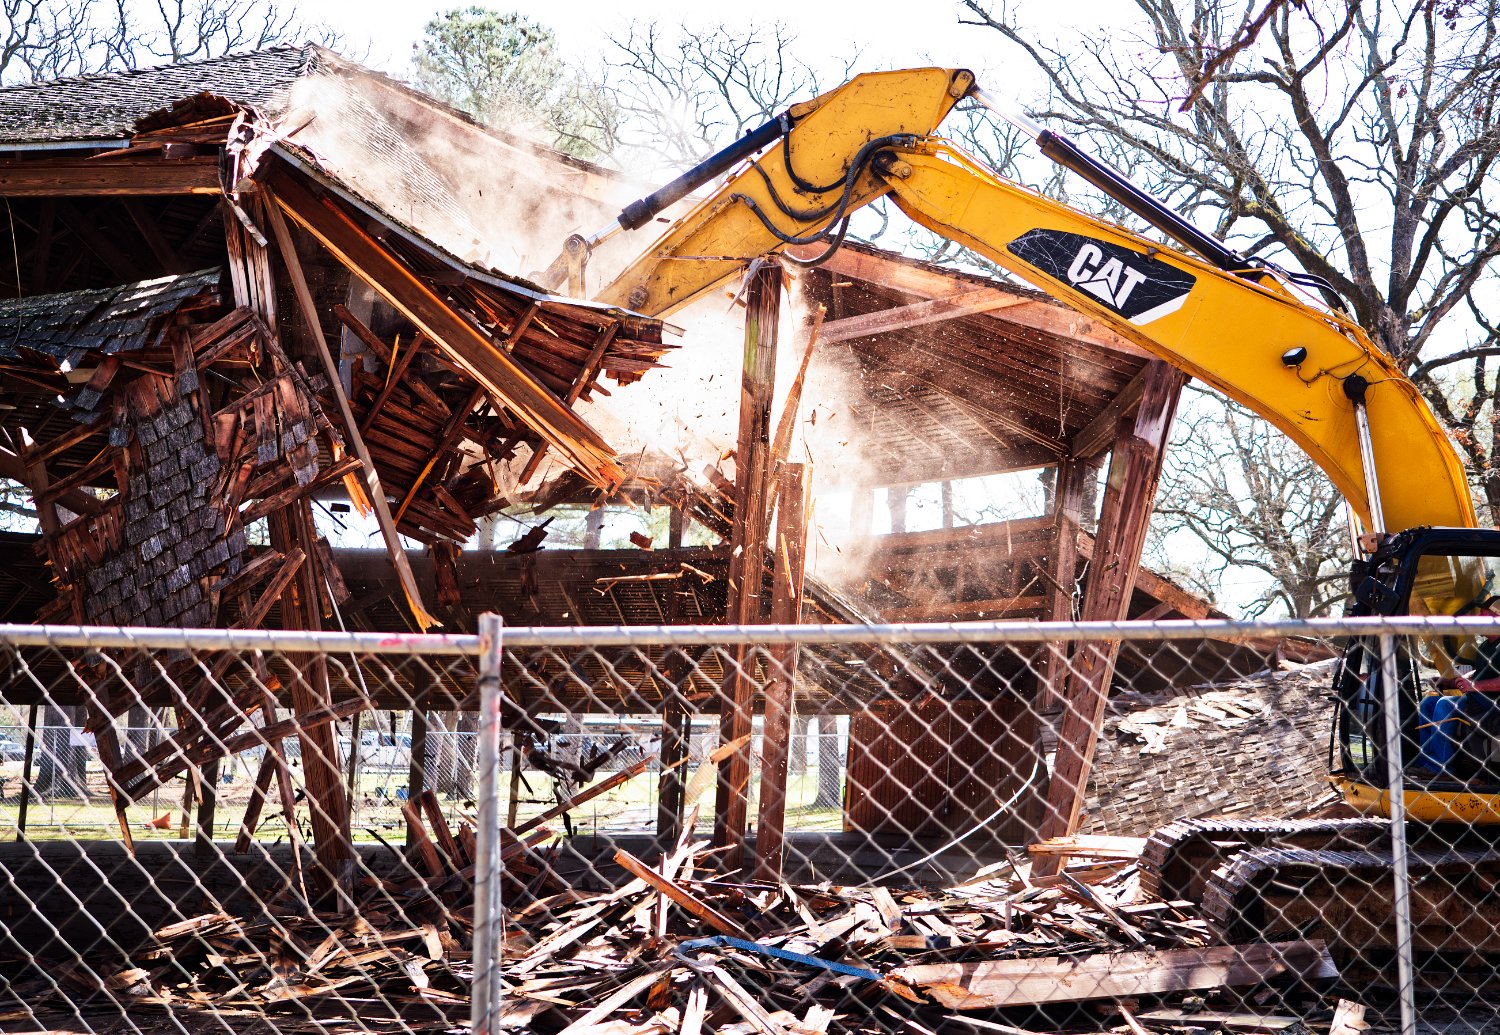 Demolition of the inner ring of the pavilion begins. [more before and after]